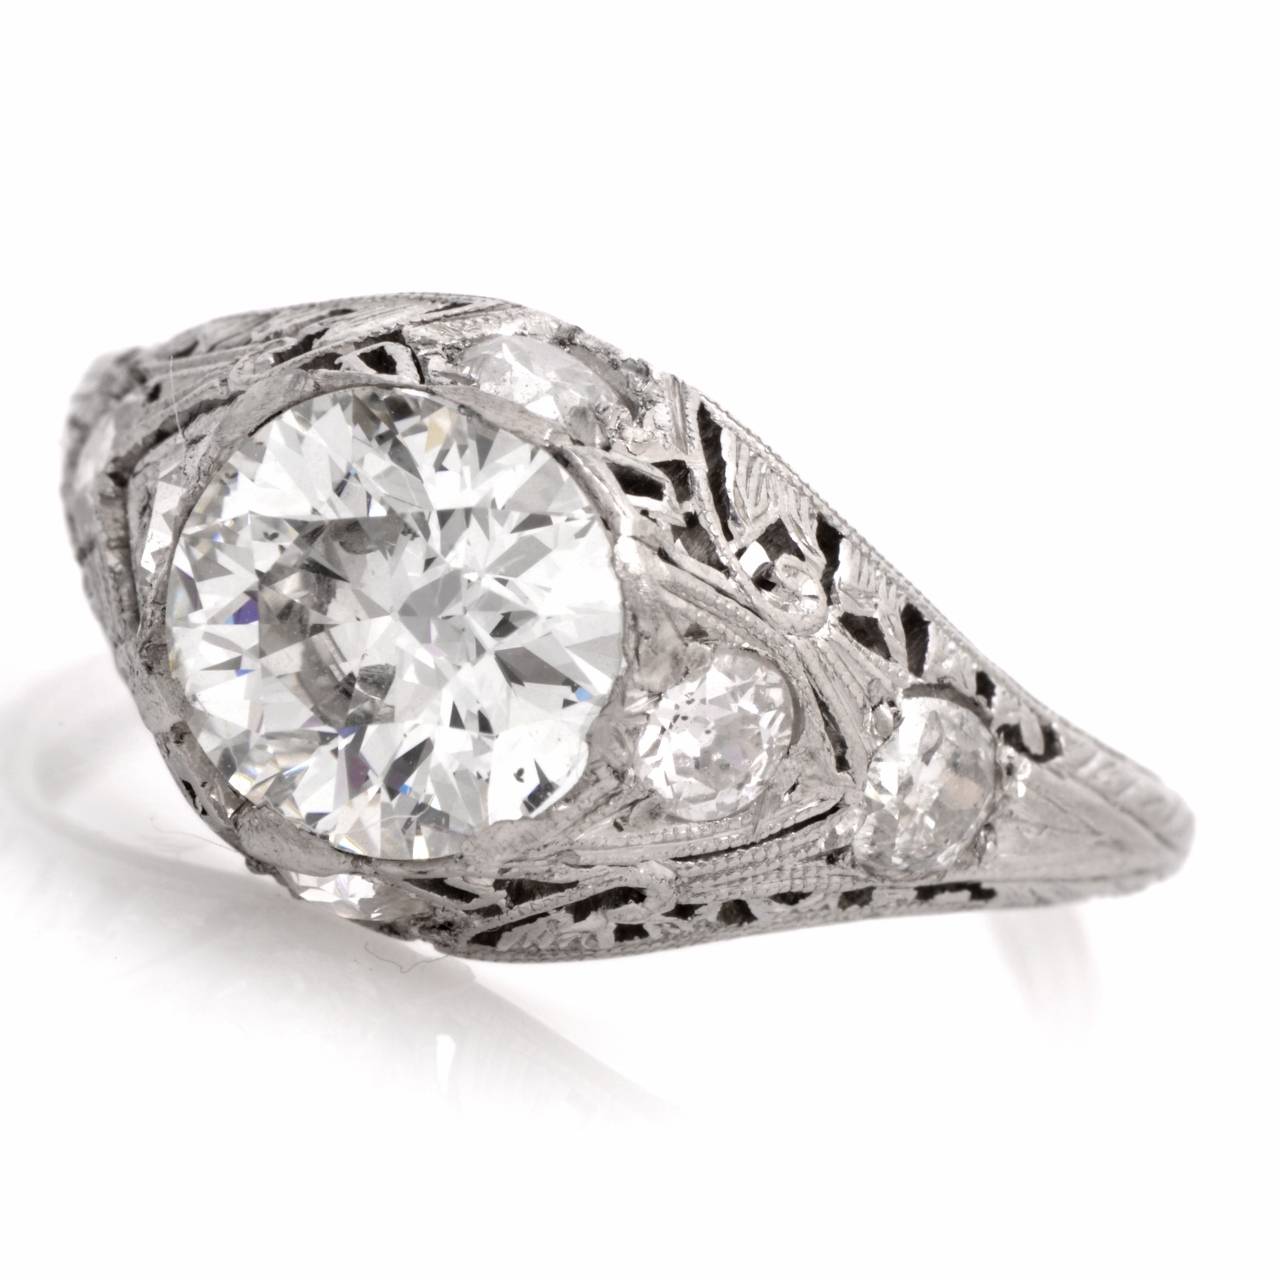 This antique 1930's filigree engagement ring of immaculate artistic workmanship is crafted in solid platinum, weighs approximately 4.2 grams and measures 6 mm high. Designed as a gracefully  domed  plaque, this fascinating vintage engagement ring